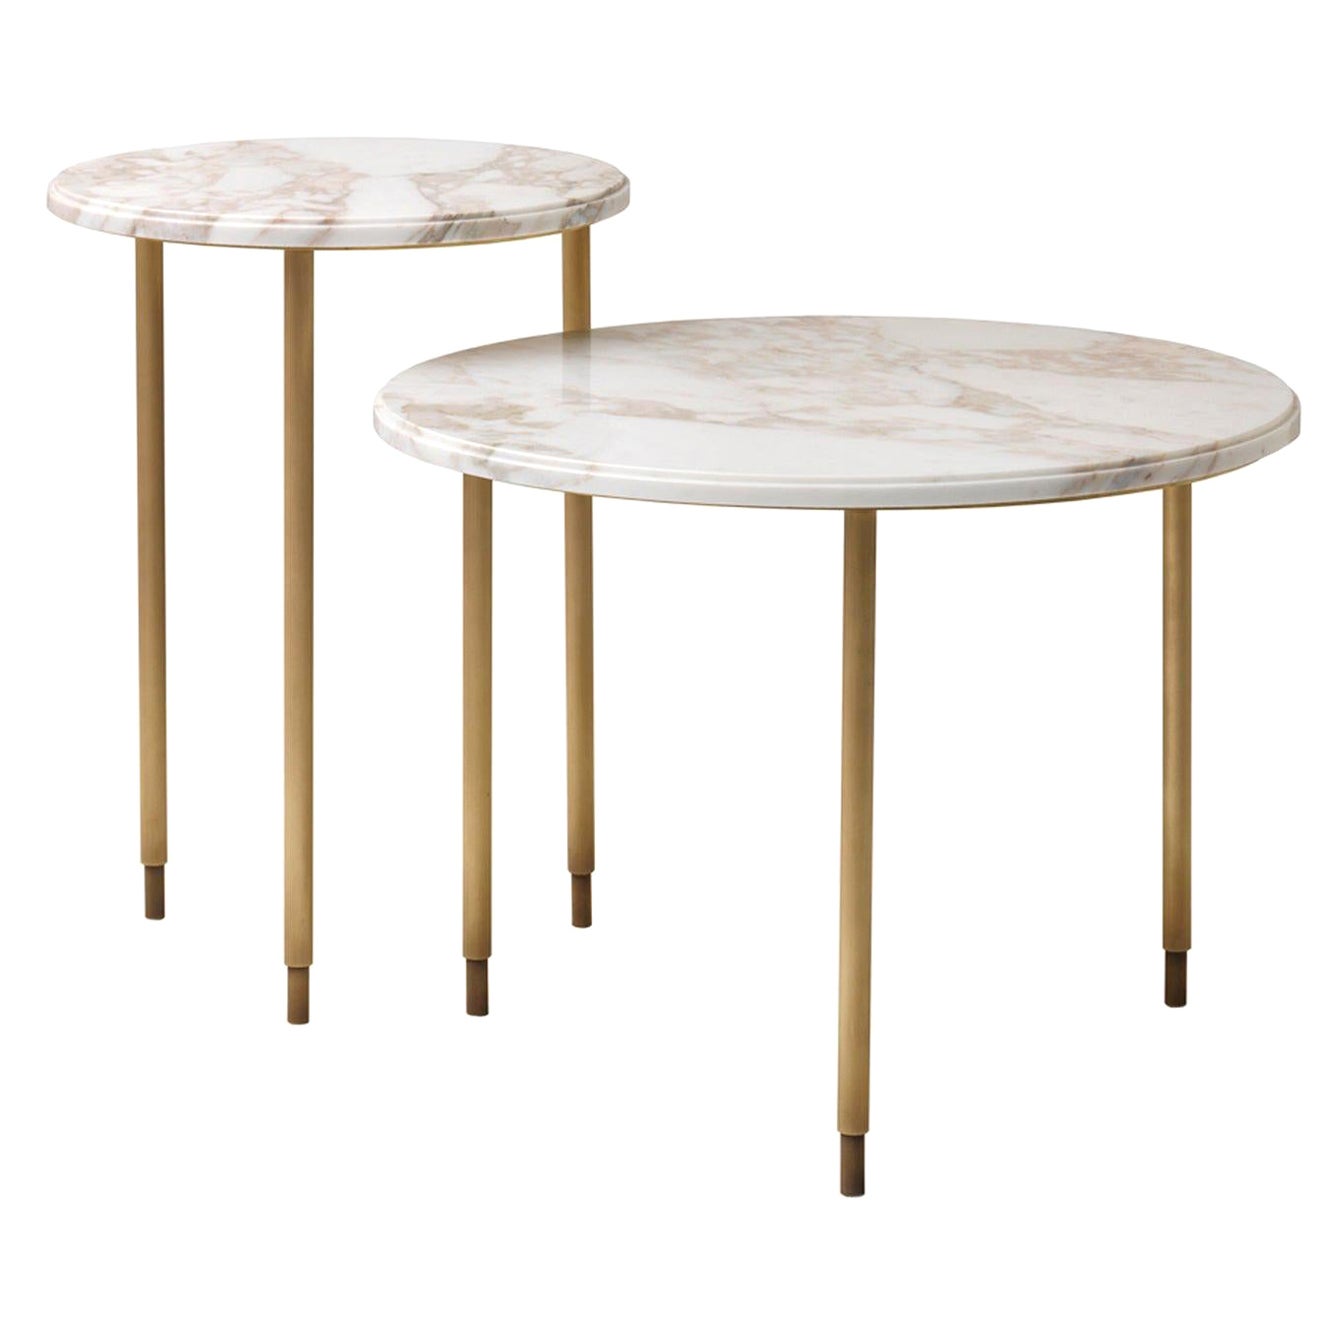 Set of 2 Gaudi Side Tables by Daytona For Sale